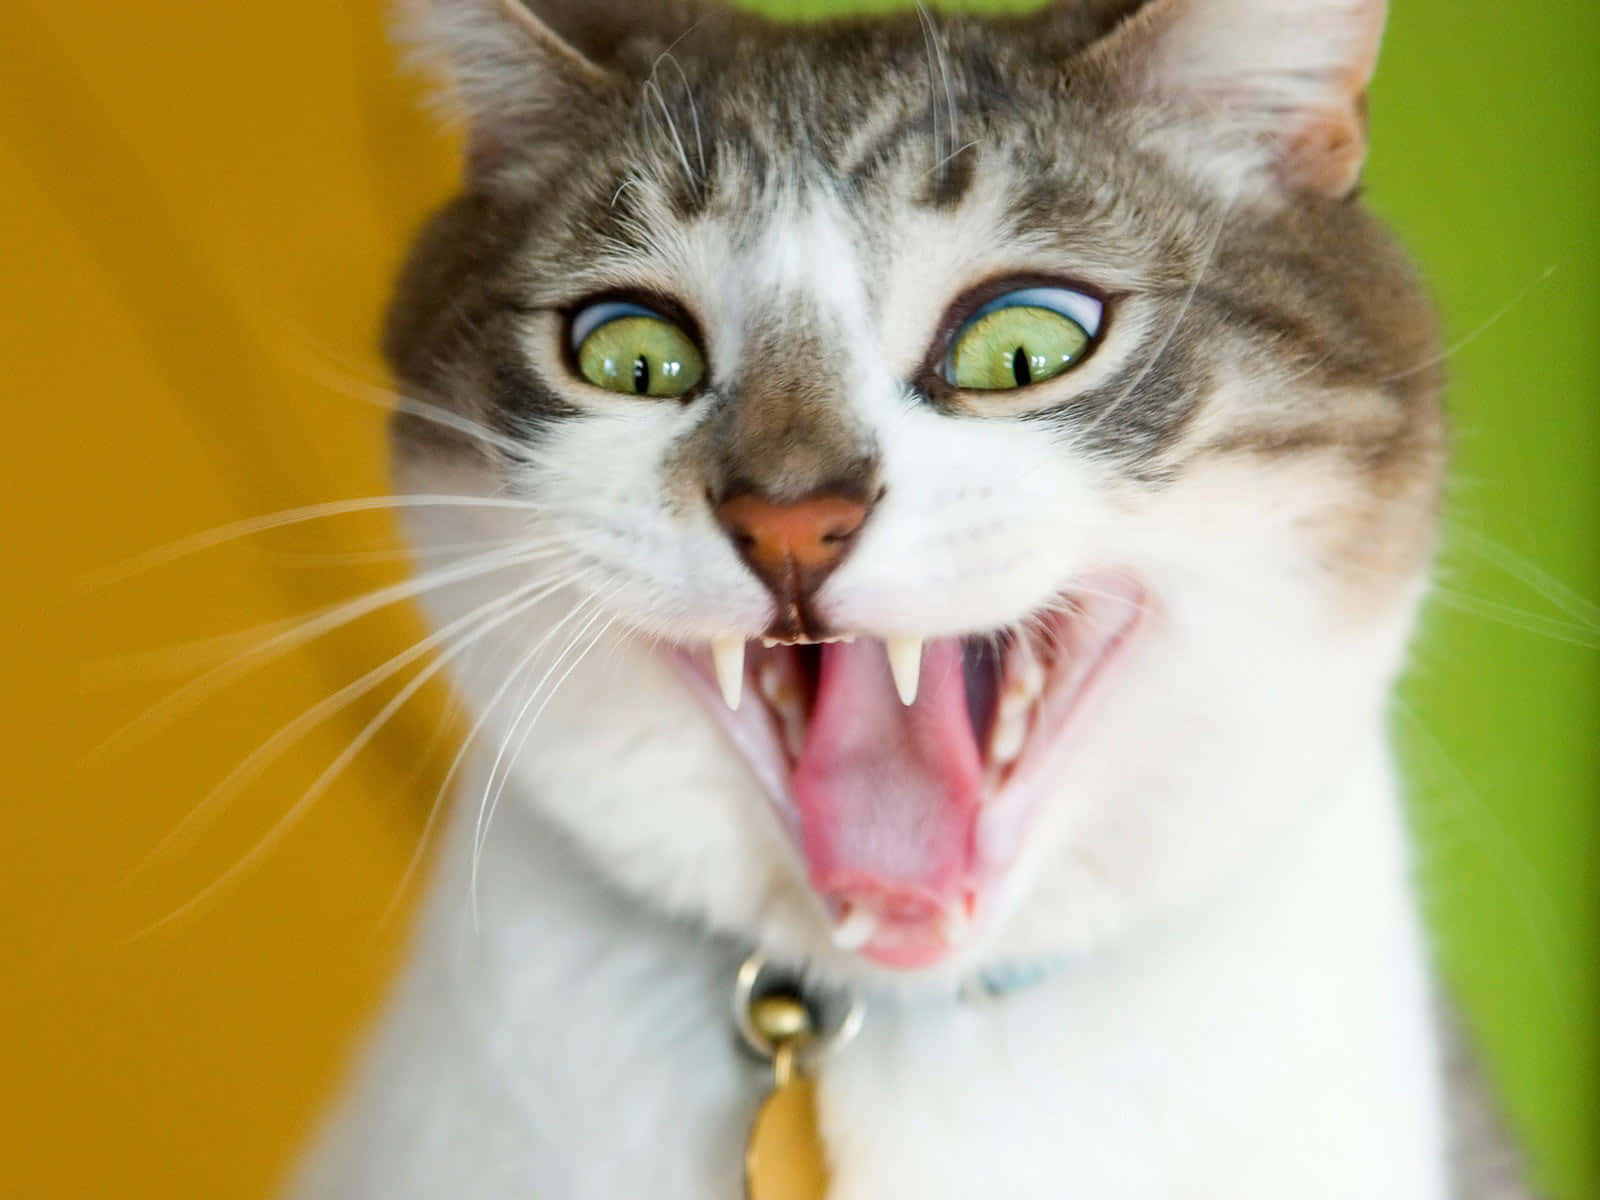 A Cat With Its Mouth Open And Teeth Showing